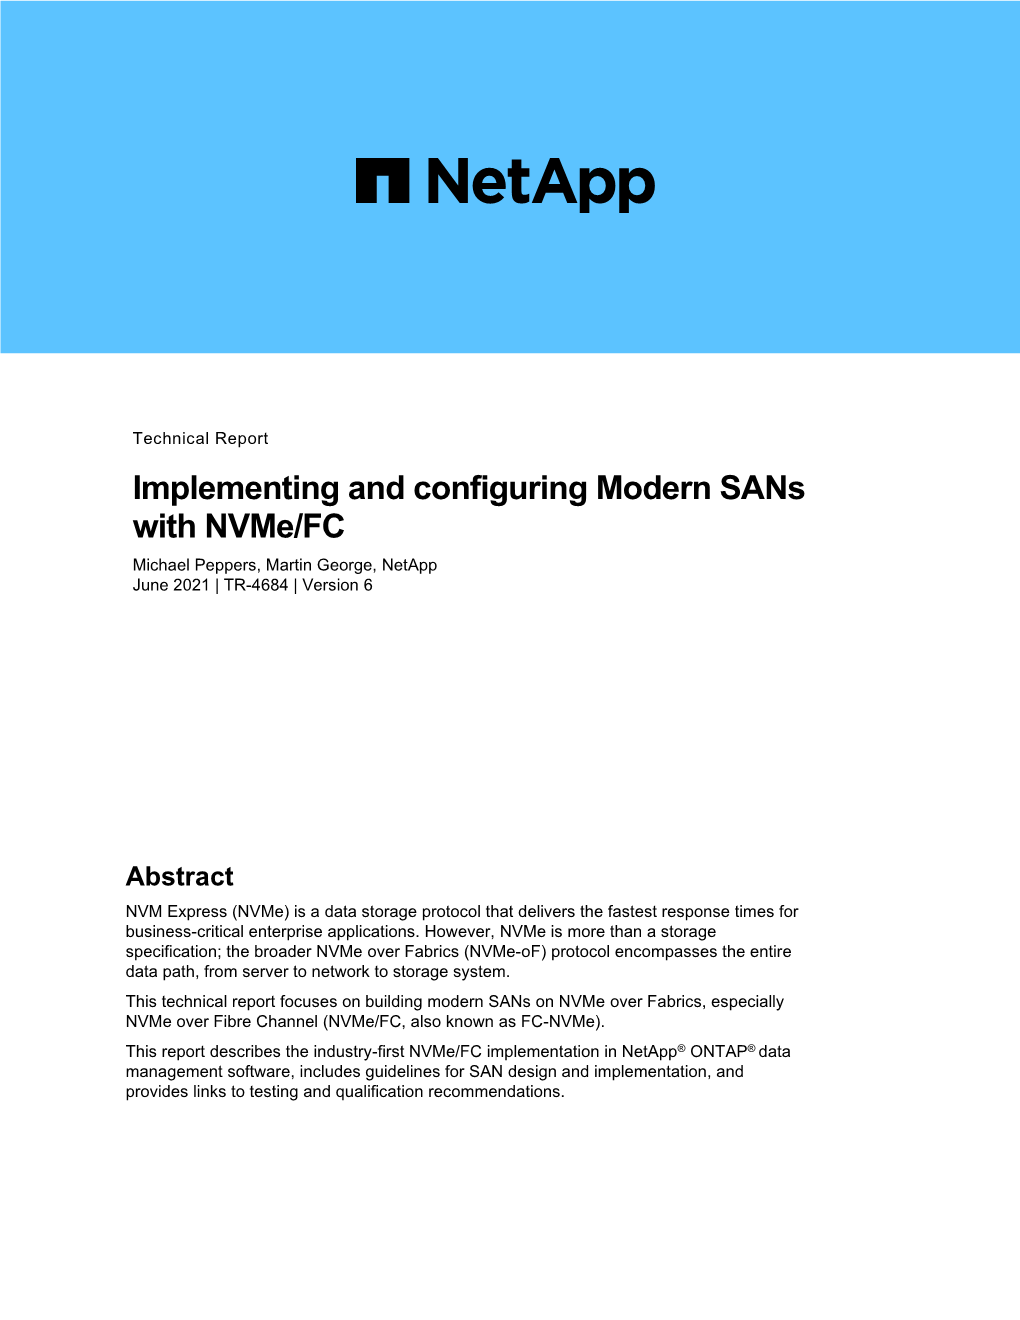 TR-4684: Implementing and Configuring Modern Sans with Nvme/FC